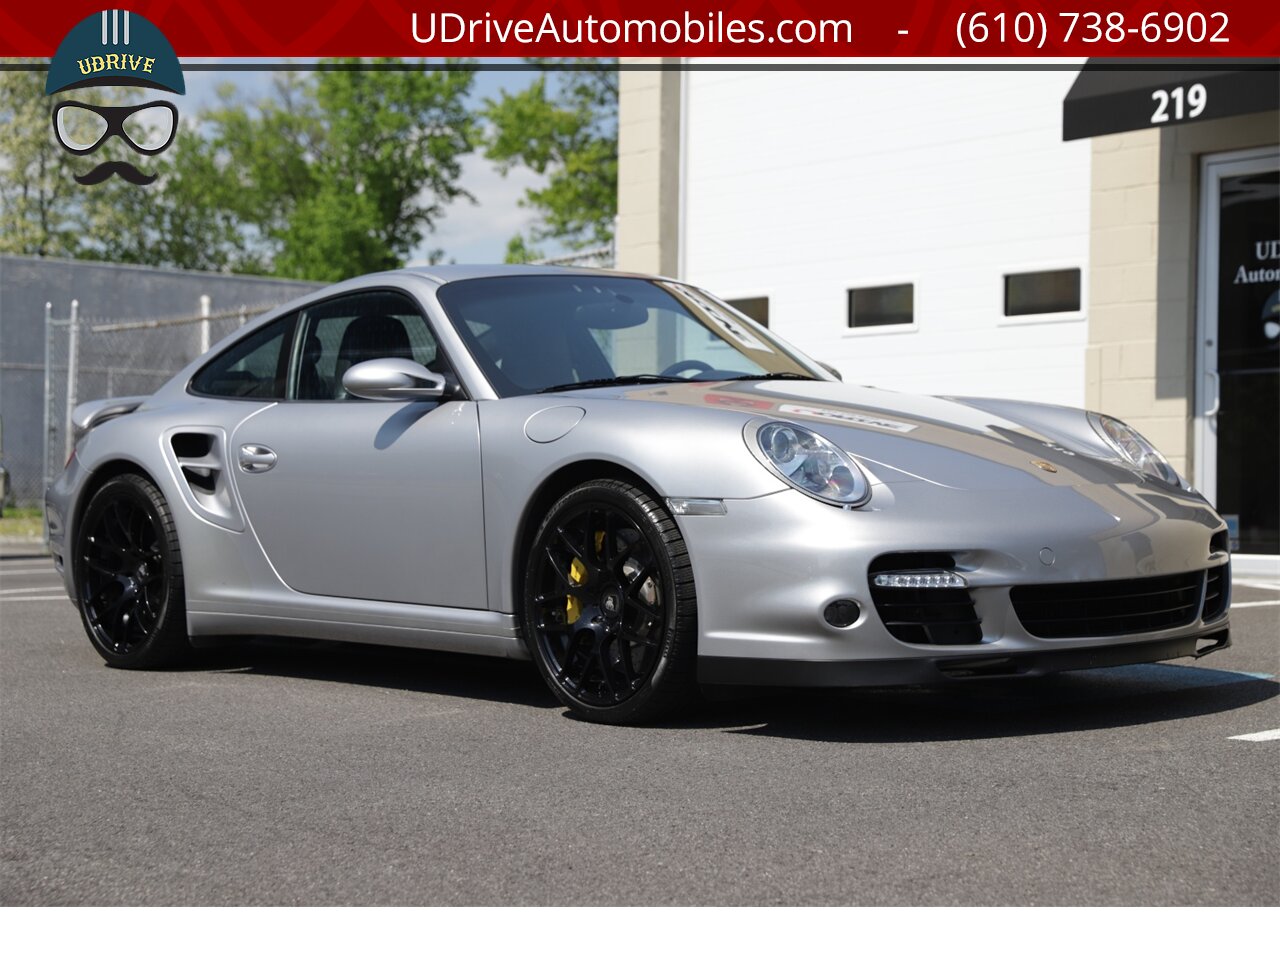 2008 Porsche 911 6 Speed Manual Turbo 997 PCCB's $149k MSRP   - Photo 14 - West Chester, PA 19382